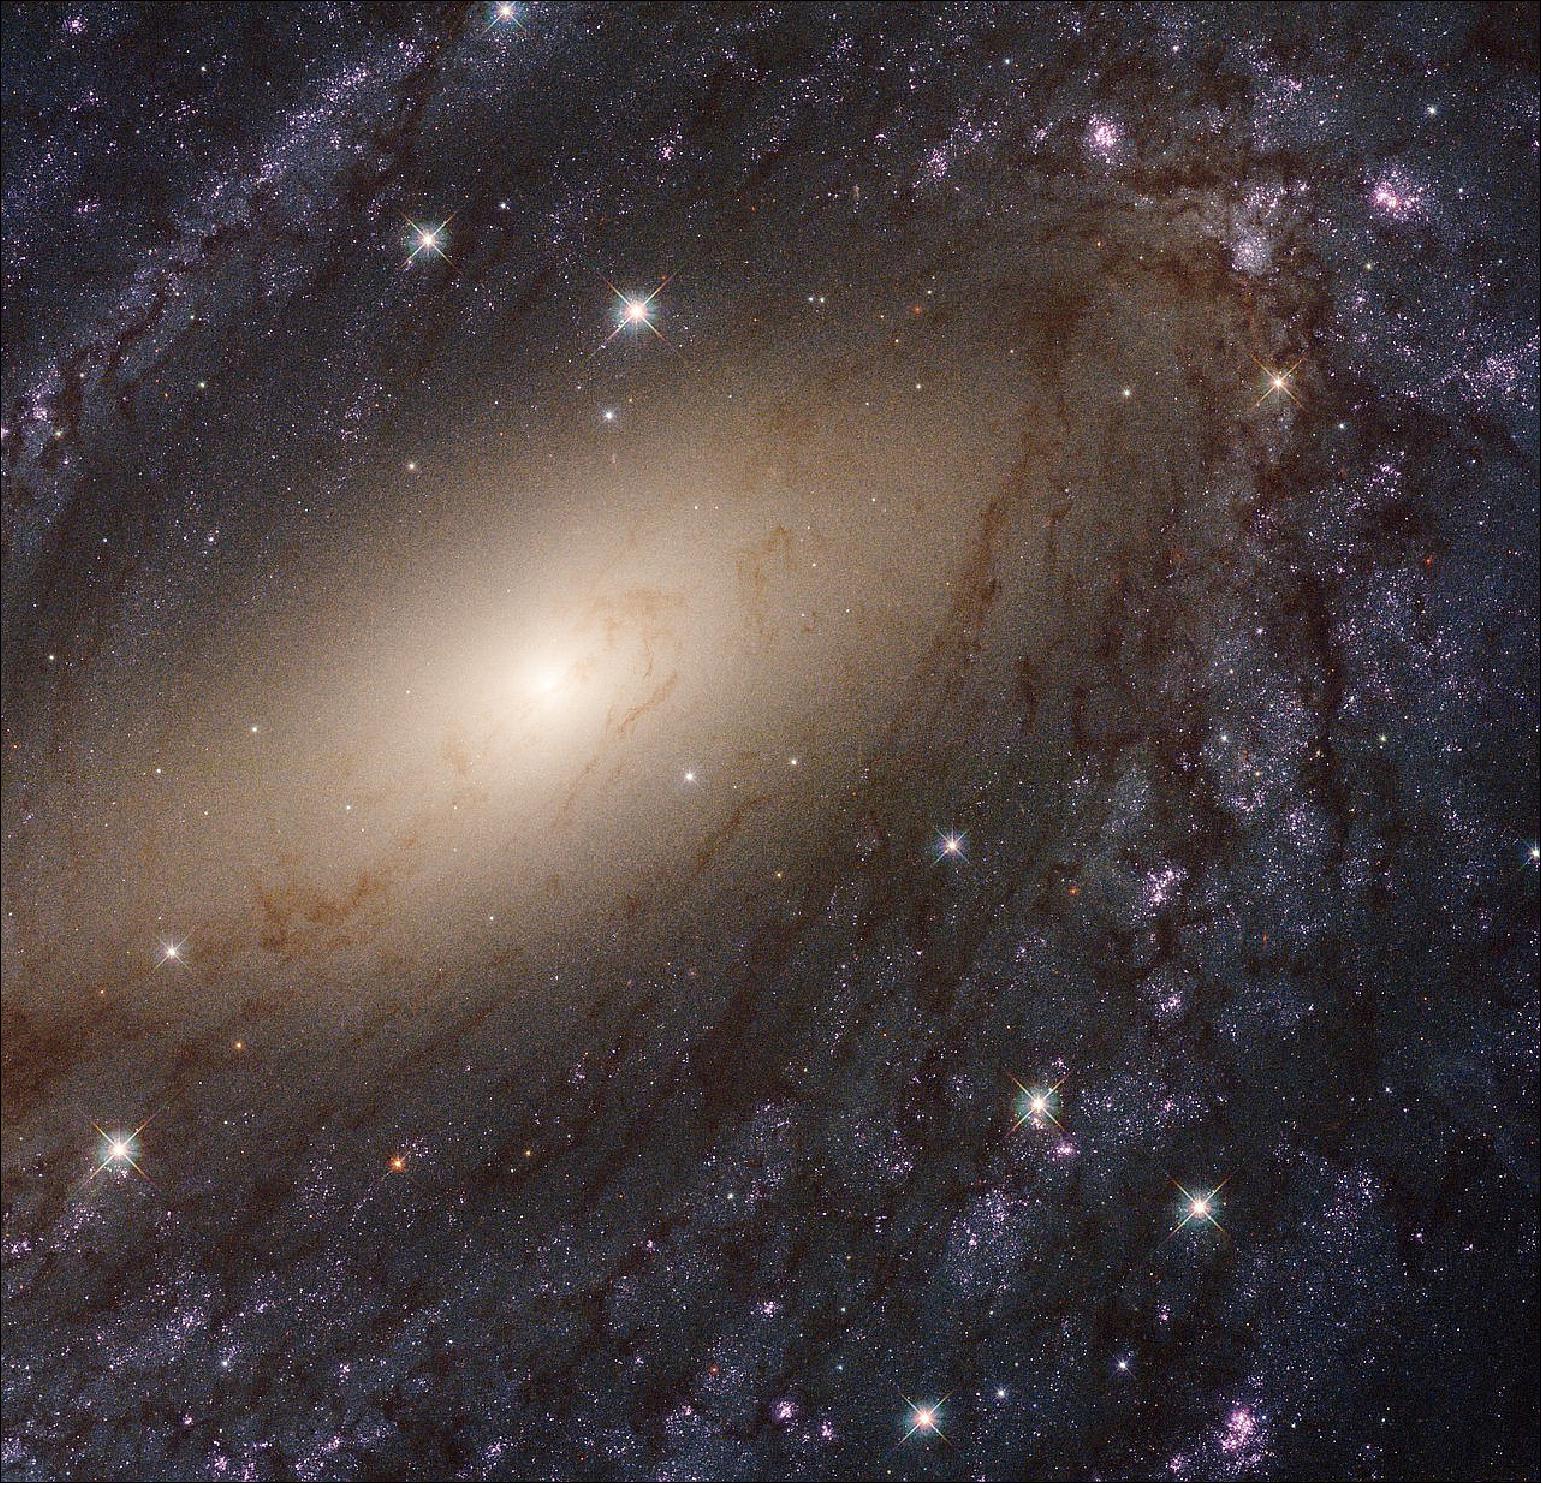 Figure 36: The glowing spiral arms of NGC 6744. This image shows the galaxy NGC 6744, about 30 million light-years away. It is one of 50 galaxies observed as part of the Hubble Space Telescope’s Legacy ExtraGalactic UV Survey (LEGUS), the sharpest, most comprehensive ultraviolet-light survey of star-forming galaxies in the nearby Universe, offering an extensive resource for understanding the complexities of star formation and galaxy evolution. The image is a composite using both ultraviolet light and visible light, gathered with Hubble’s Wide Field Camera 3 and Advanced Camera for Surveys (image credit: NASA, ESA, and the LEGUS team)